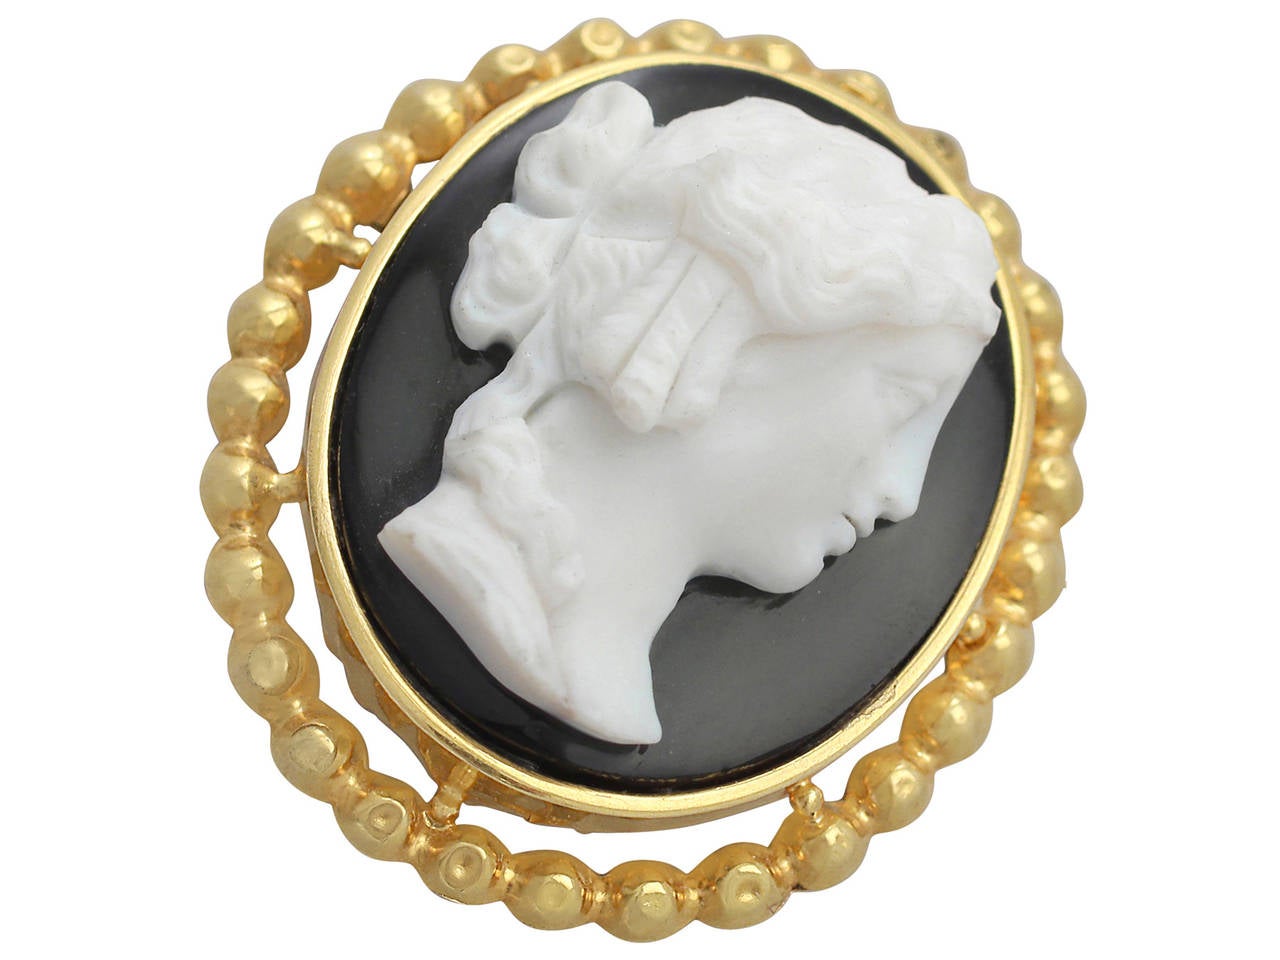 A fine and impressive antique French 18 karat yellow gold cameo brooch / pendant; part of our antique jewelry and estate jewelry collections

This fine antique French cameo brooch / pendant has been crafted in 18k yellow gold.

The oval cameo is